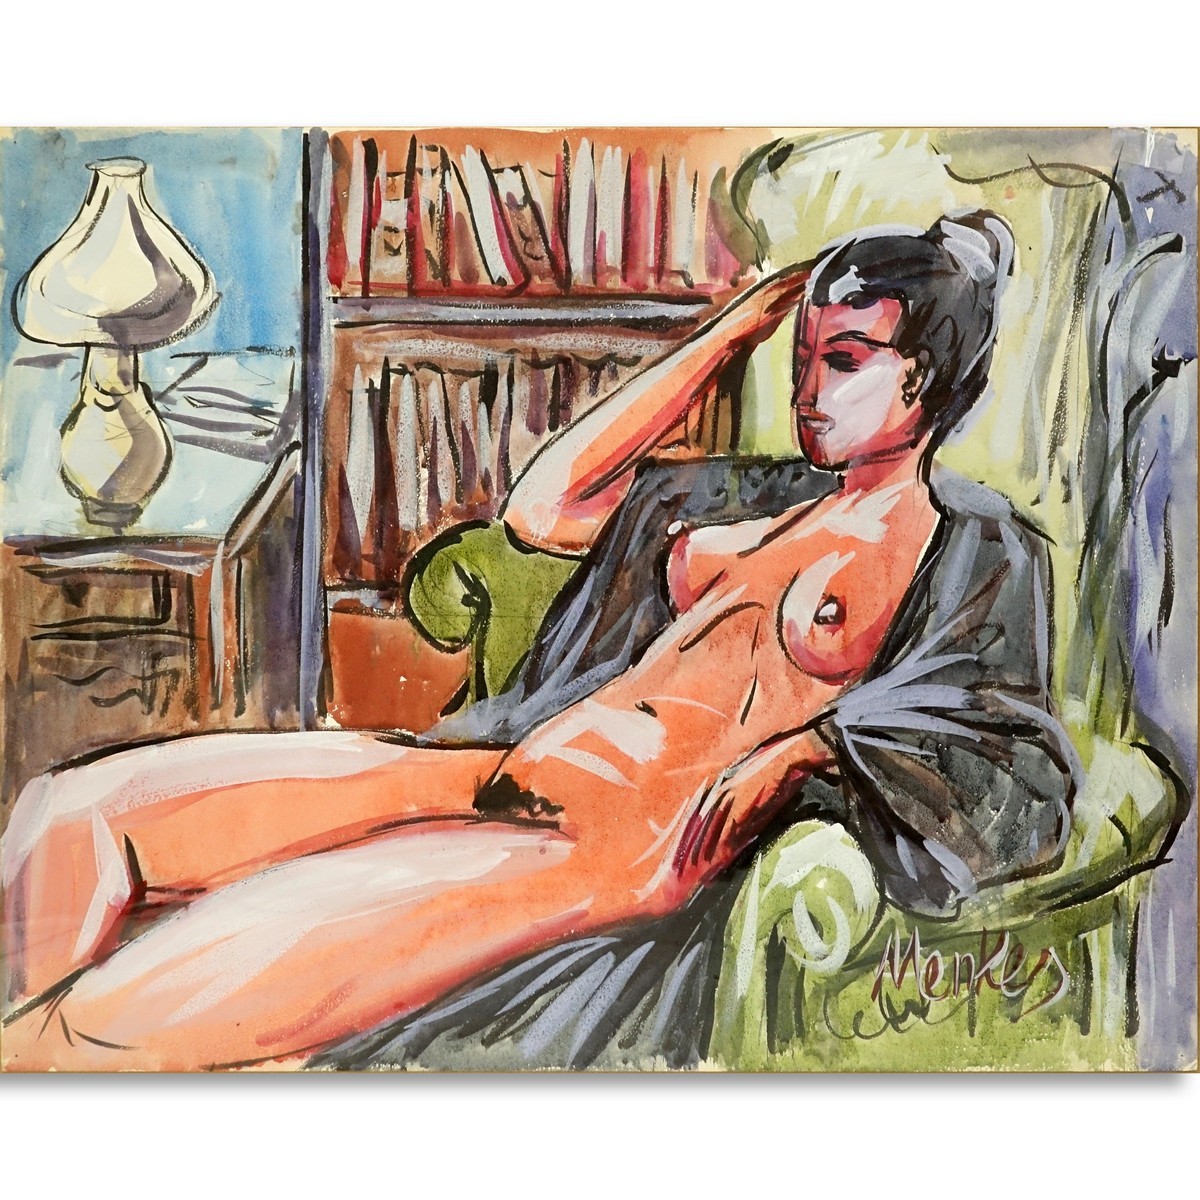 Attributed to: Sigmund Menkes, Polish (1896 - 1986) Watercolor on paper "Reclining Nude". Signed lower right.